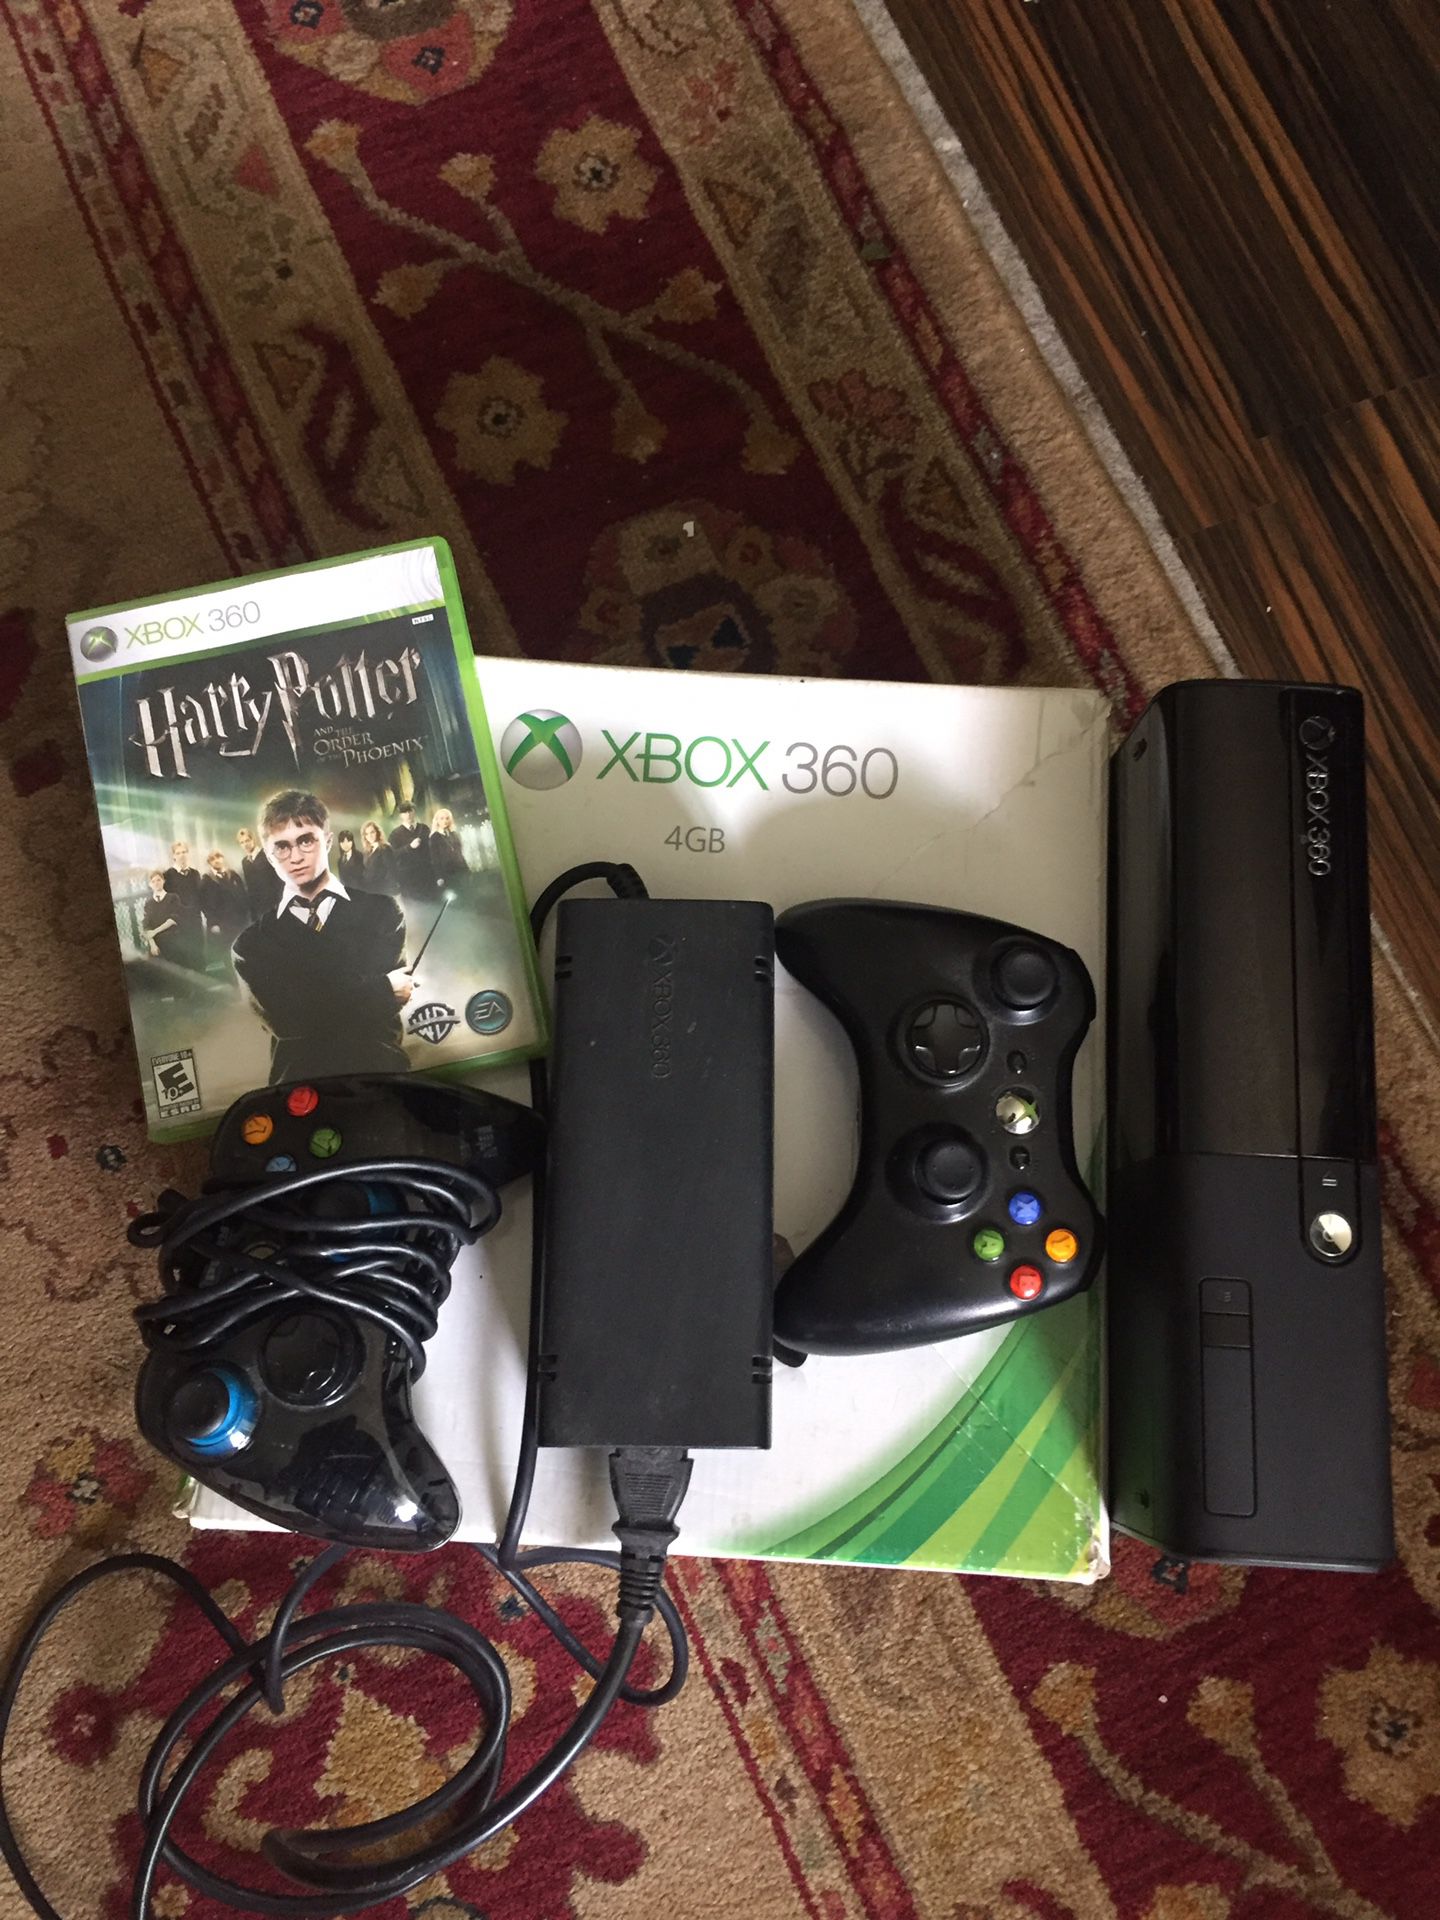 Xbox 360 4GB + 2 controllers + Harry Potter game